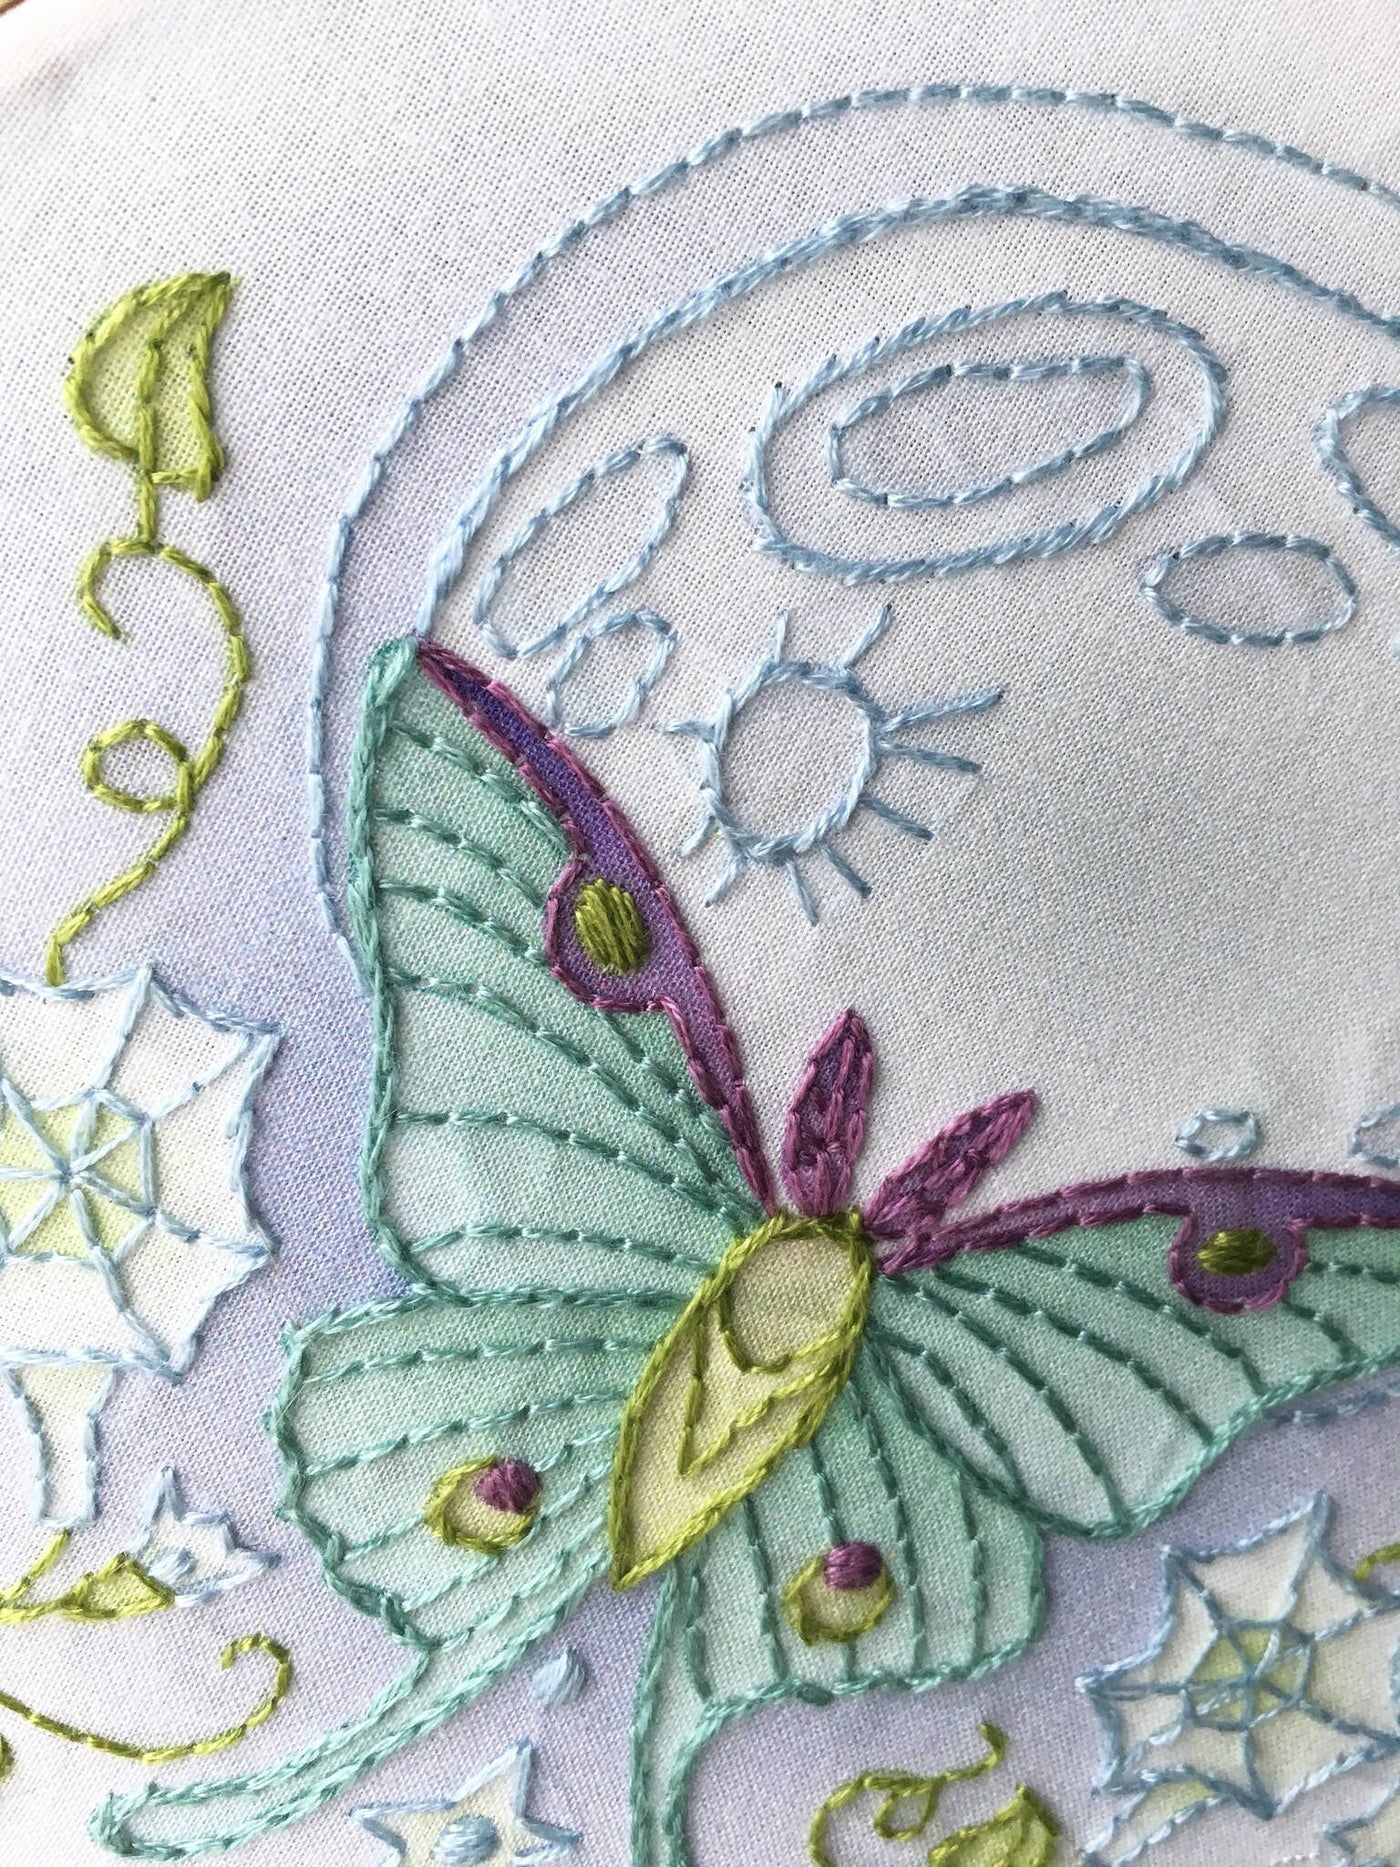 Luna Moth Butterfly Moon Hand Embroidery fabric sampler